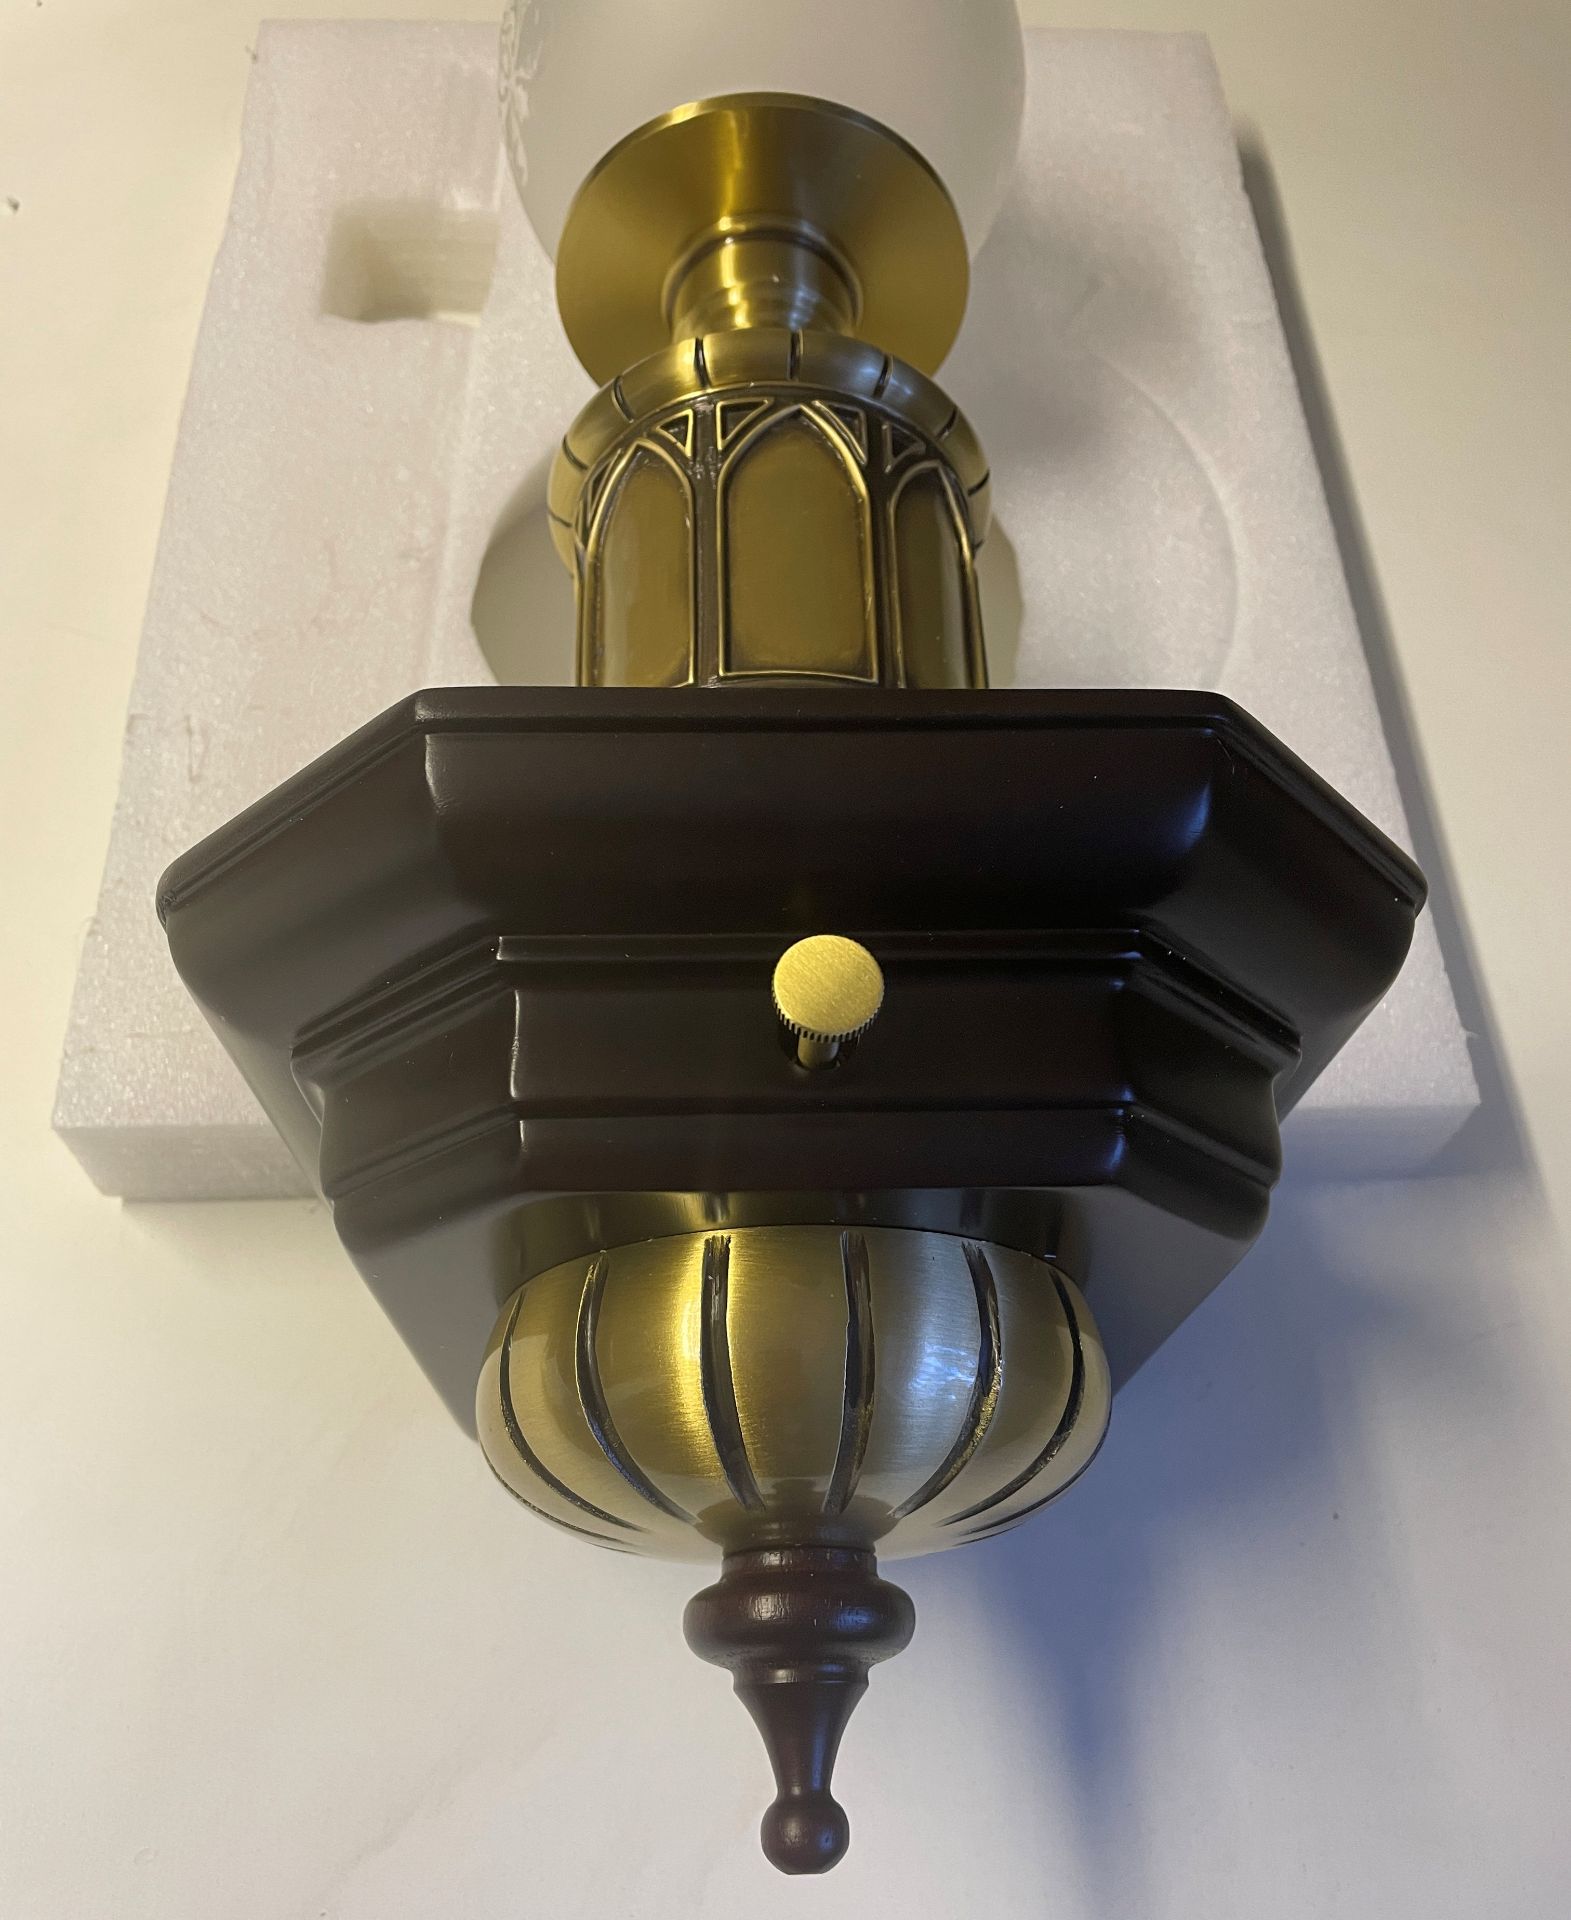 1 x Chelsom Substantial Wall Feature Light with dimmer switch and newall post style brass and glass - Image 3 of 18